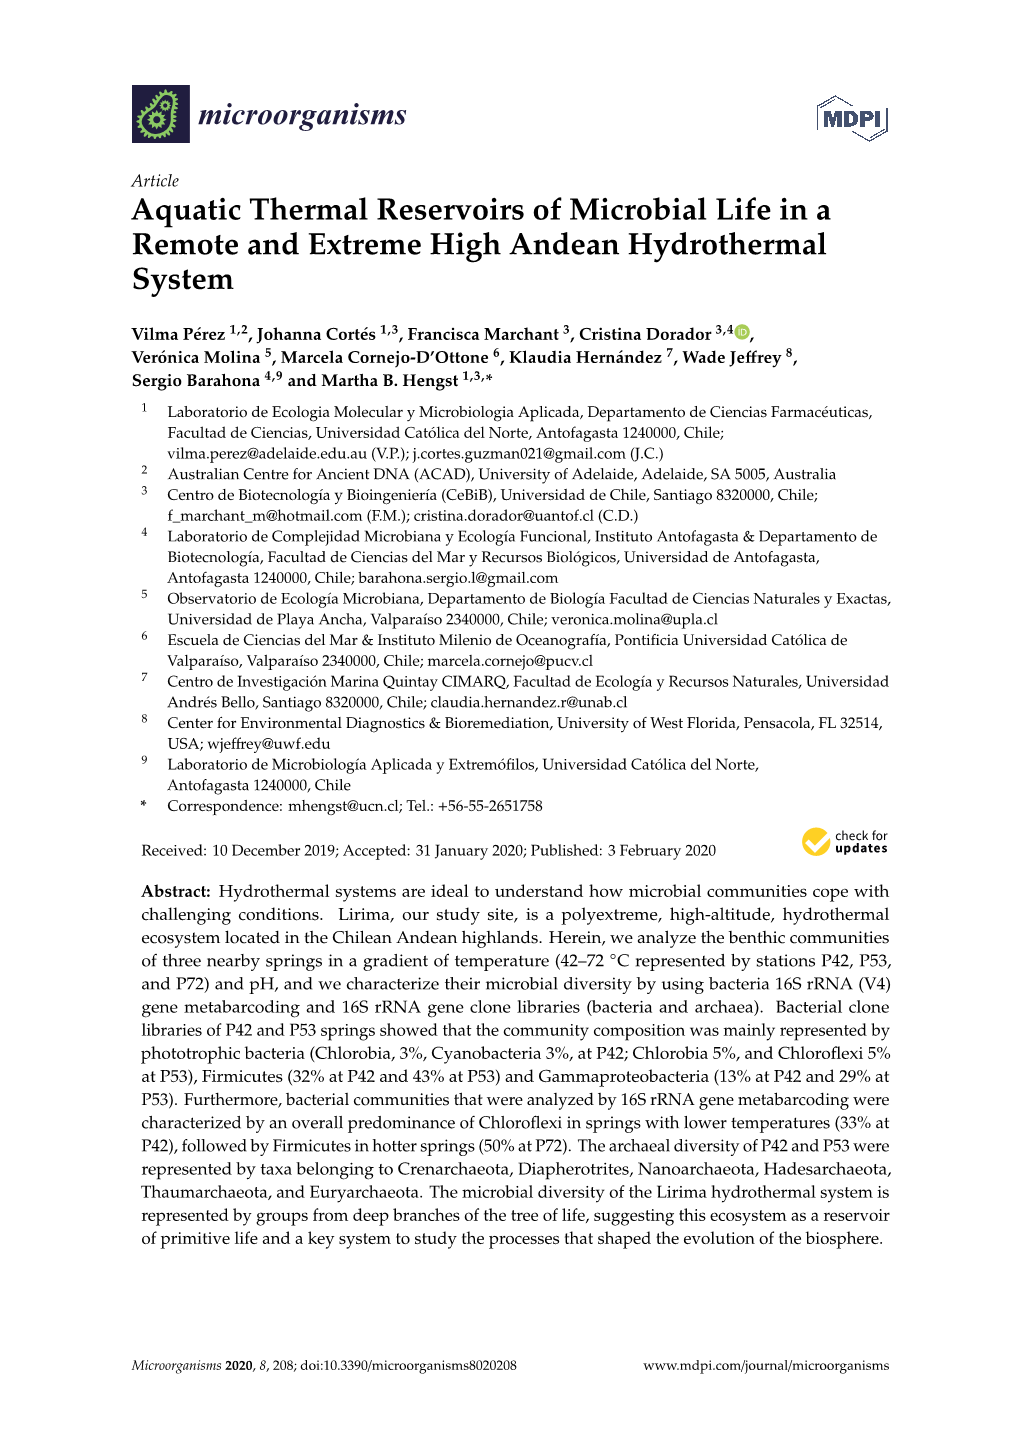 Aquatic Thermal Reservoirs of Microbial Life in a Remote and Extreme High Andean Hydrothermal System